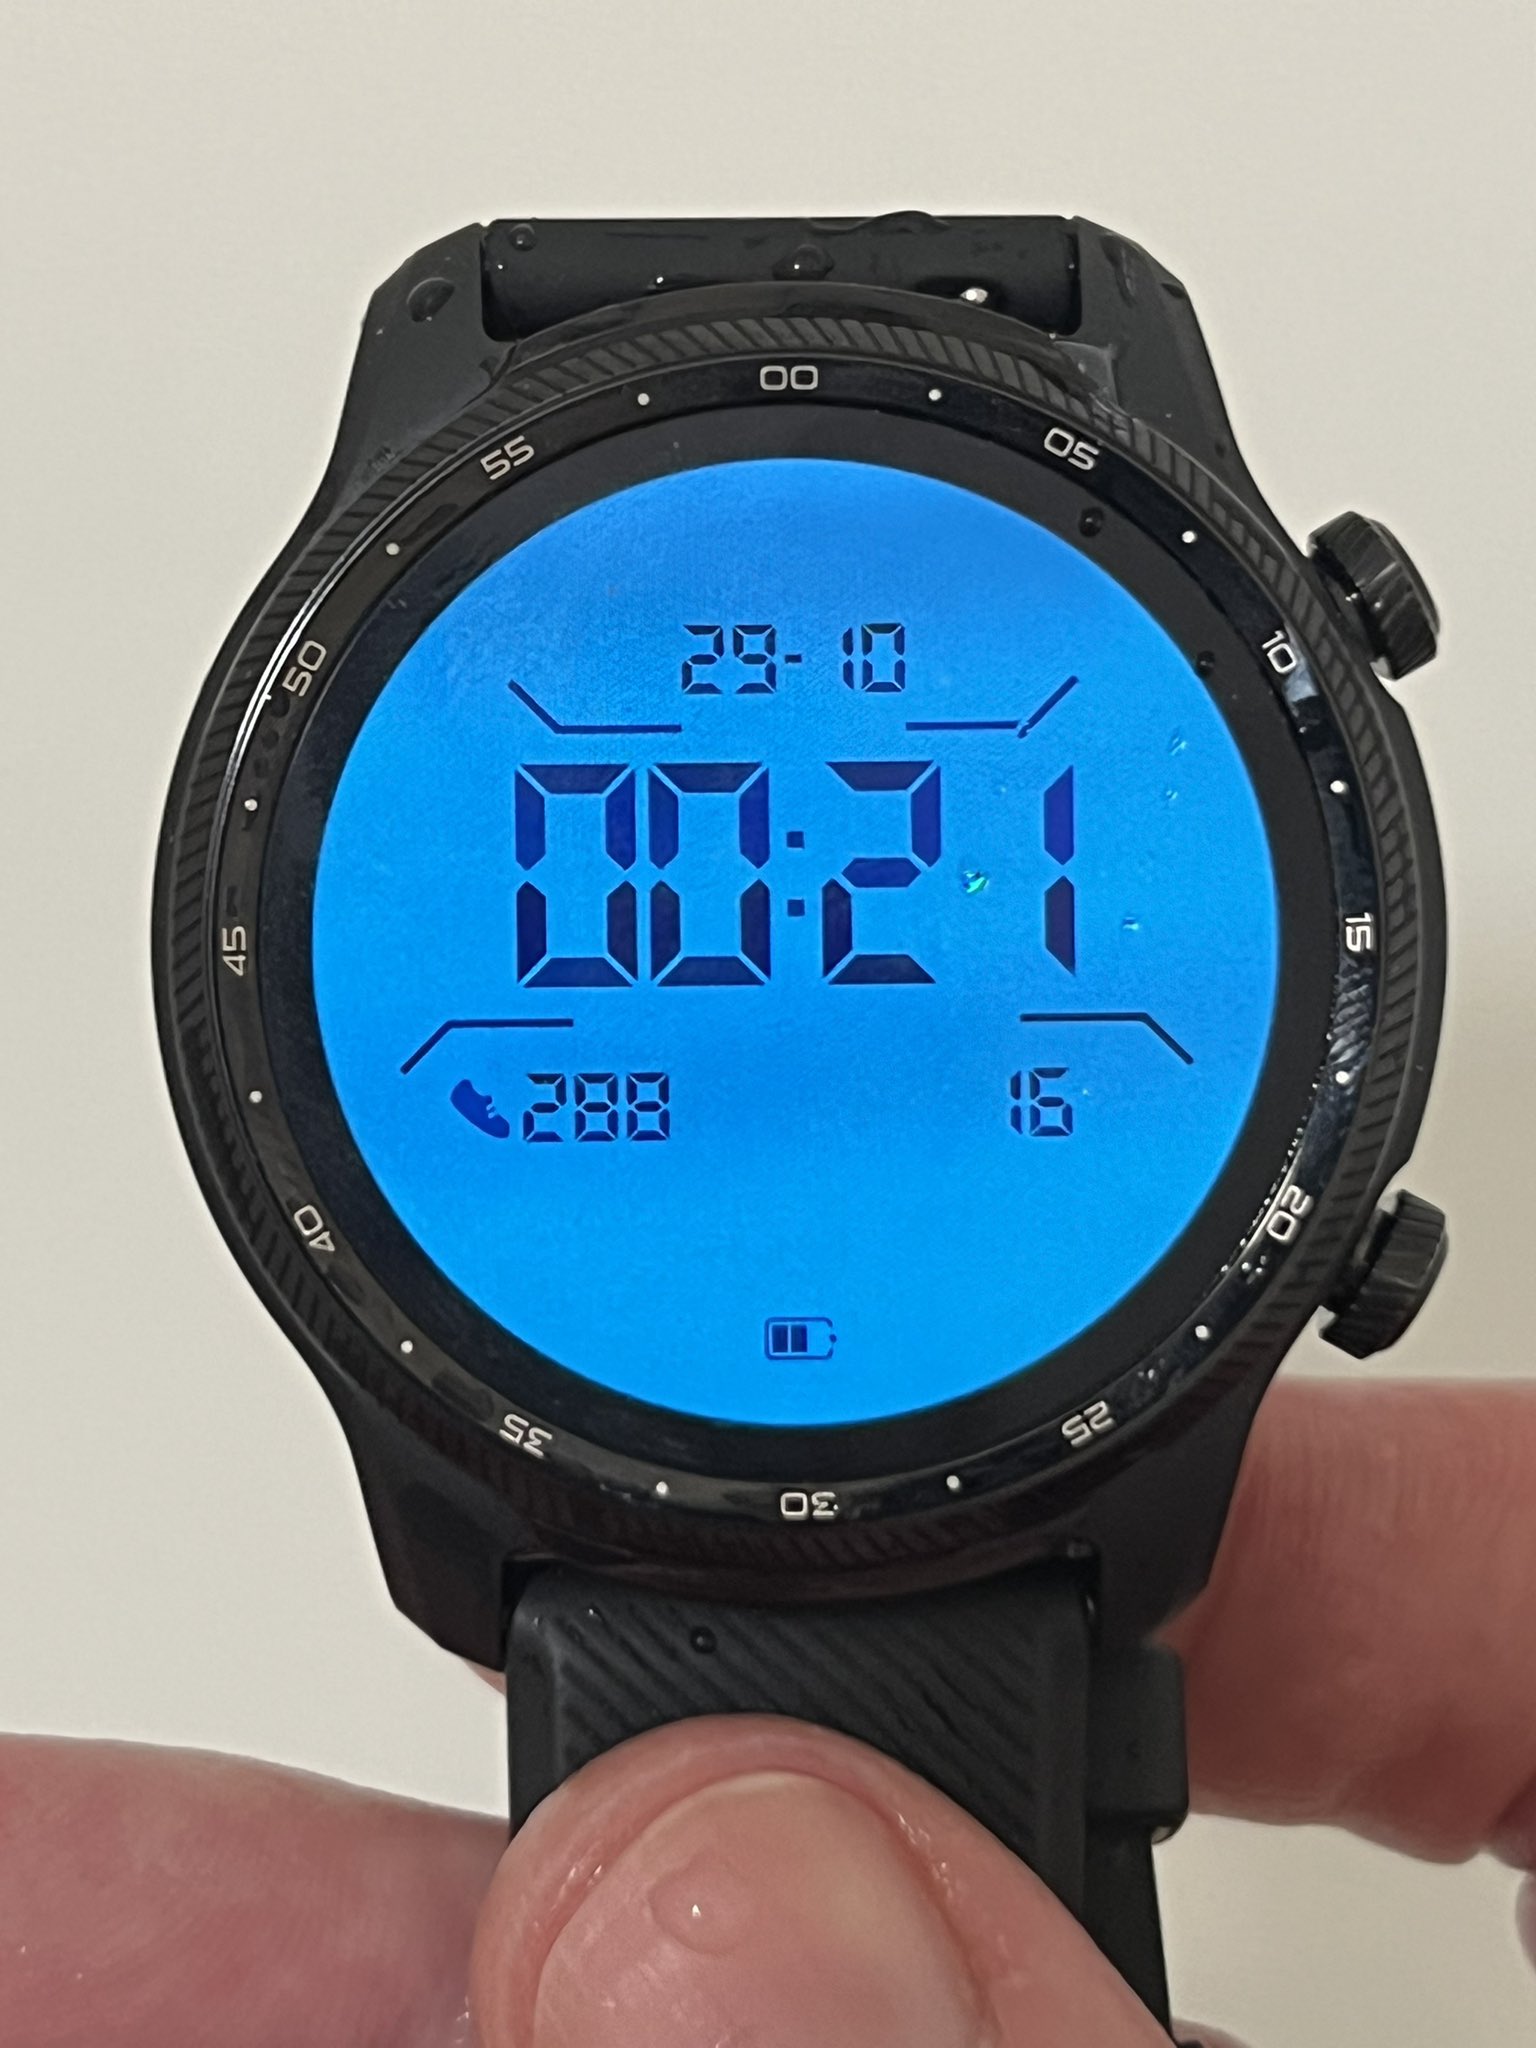 TicWatch Pro 3 Ultra GPS and TicWatch Pro 3 GPS users have started  receiving the Wear OS 3.5 update